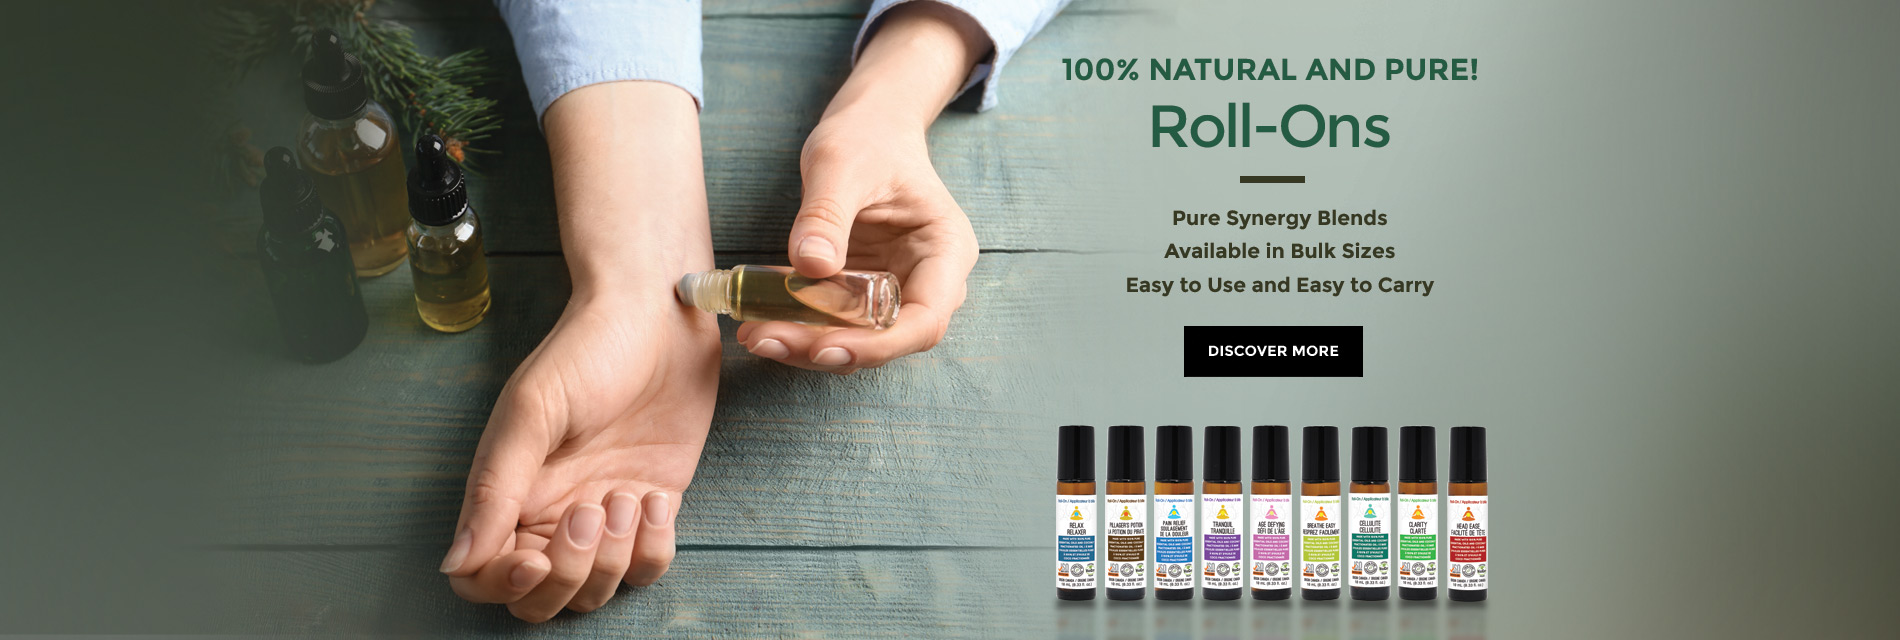 Synergy Blend Roll-Ons